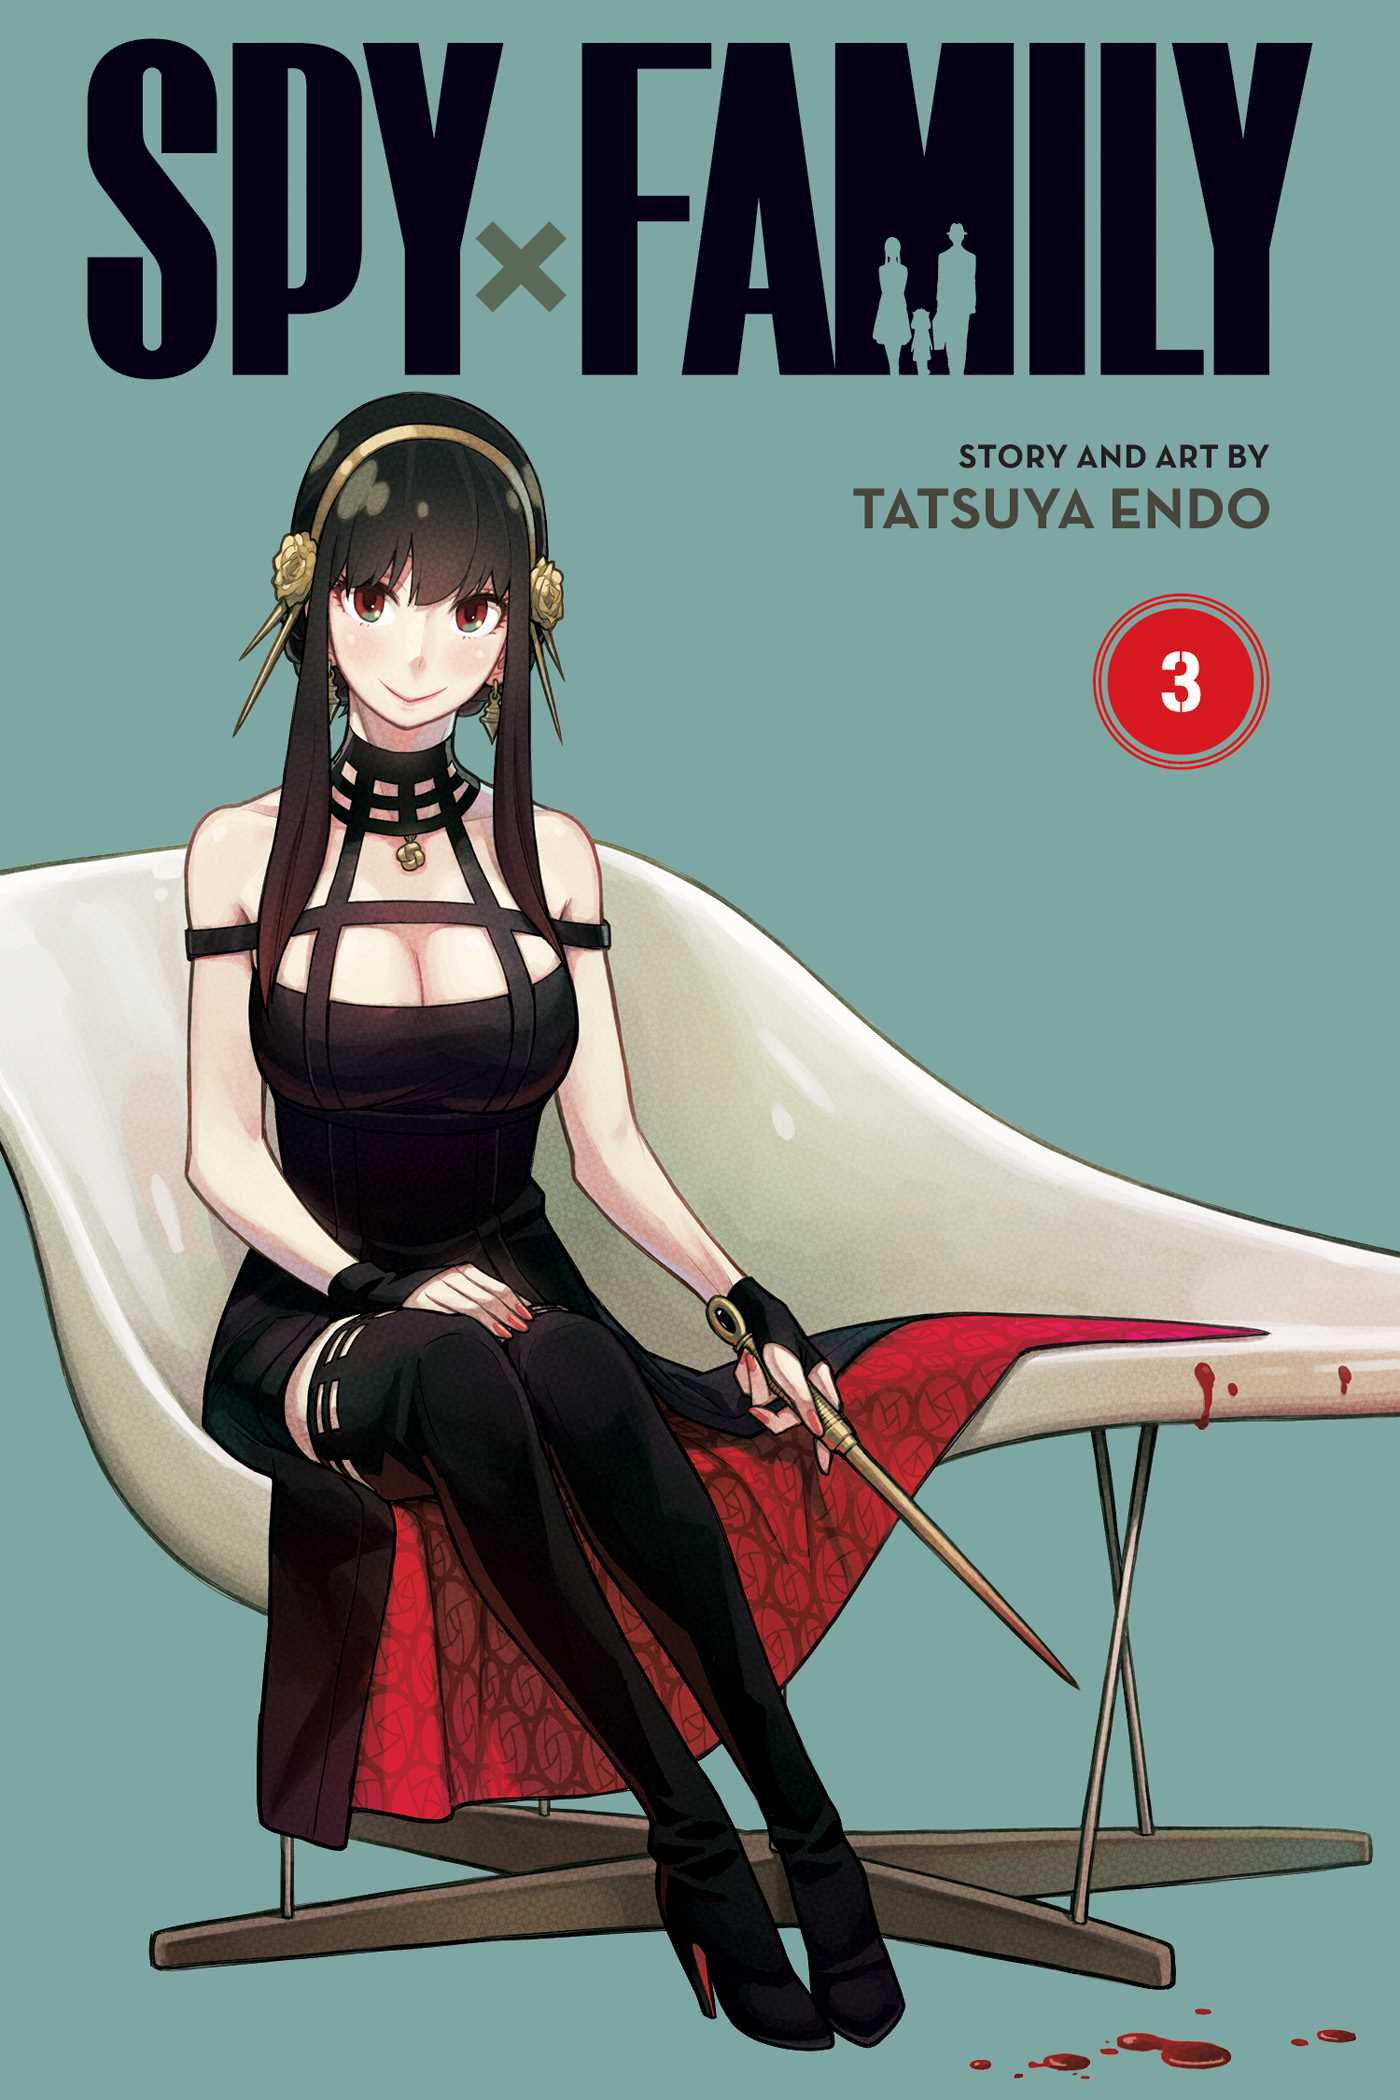 Spy x Family Death Note Short Stories Among NY Times June BestSellers   Anime Corner